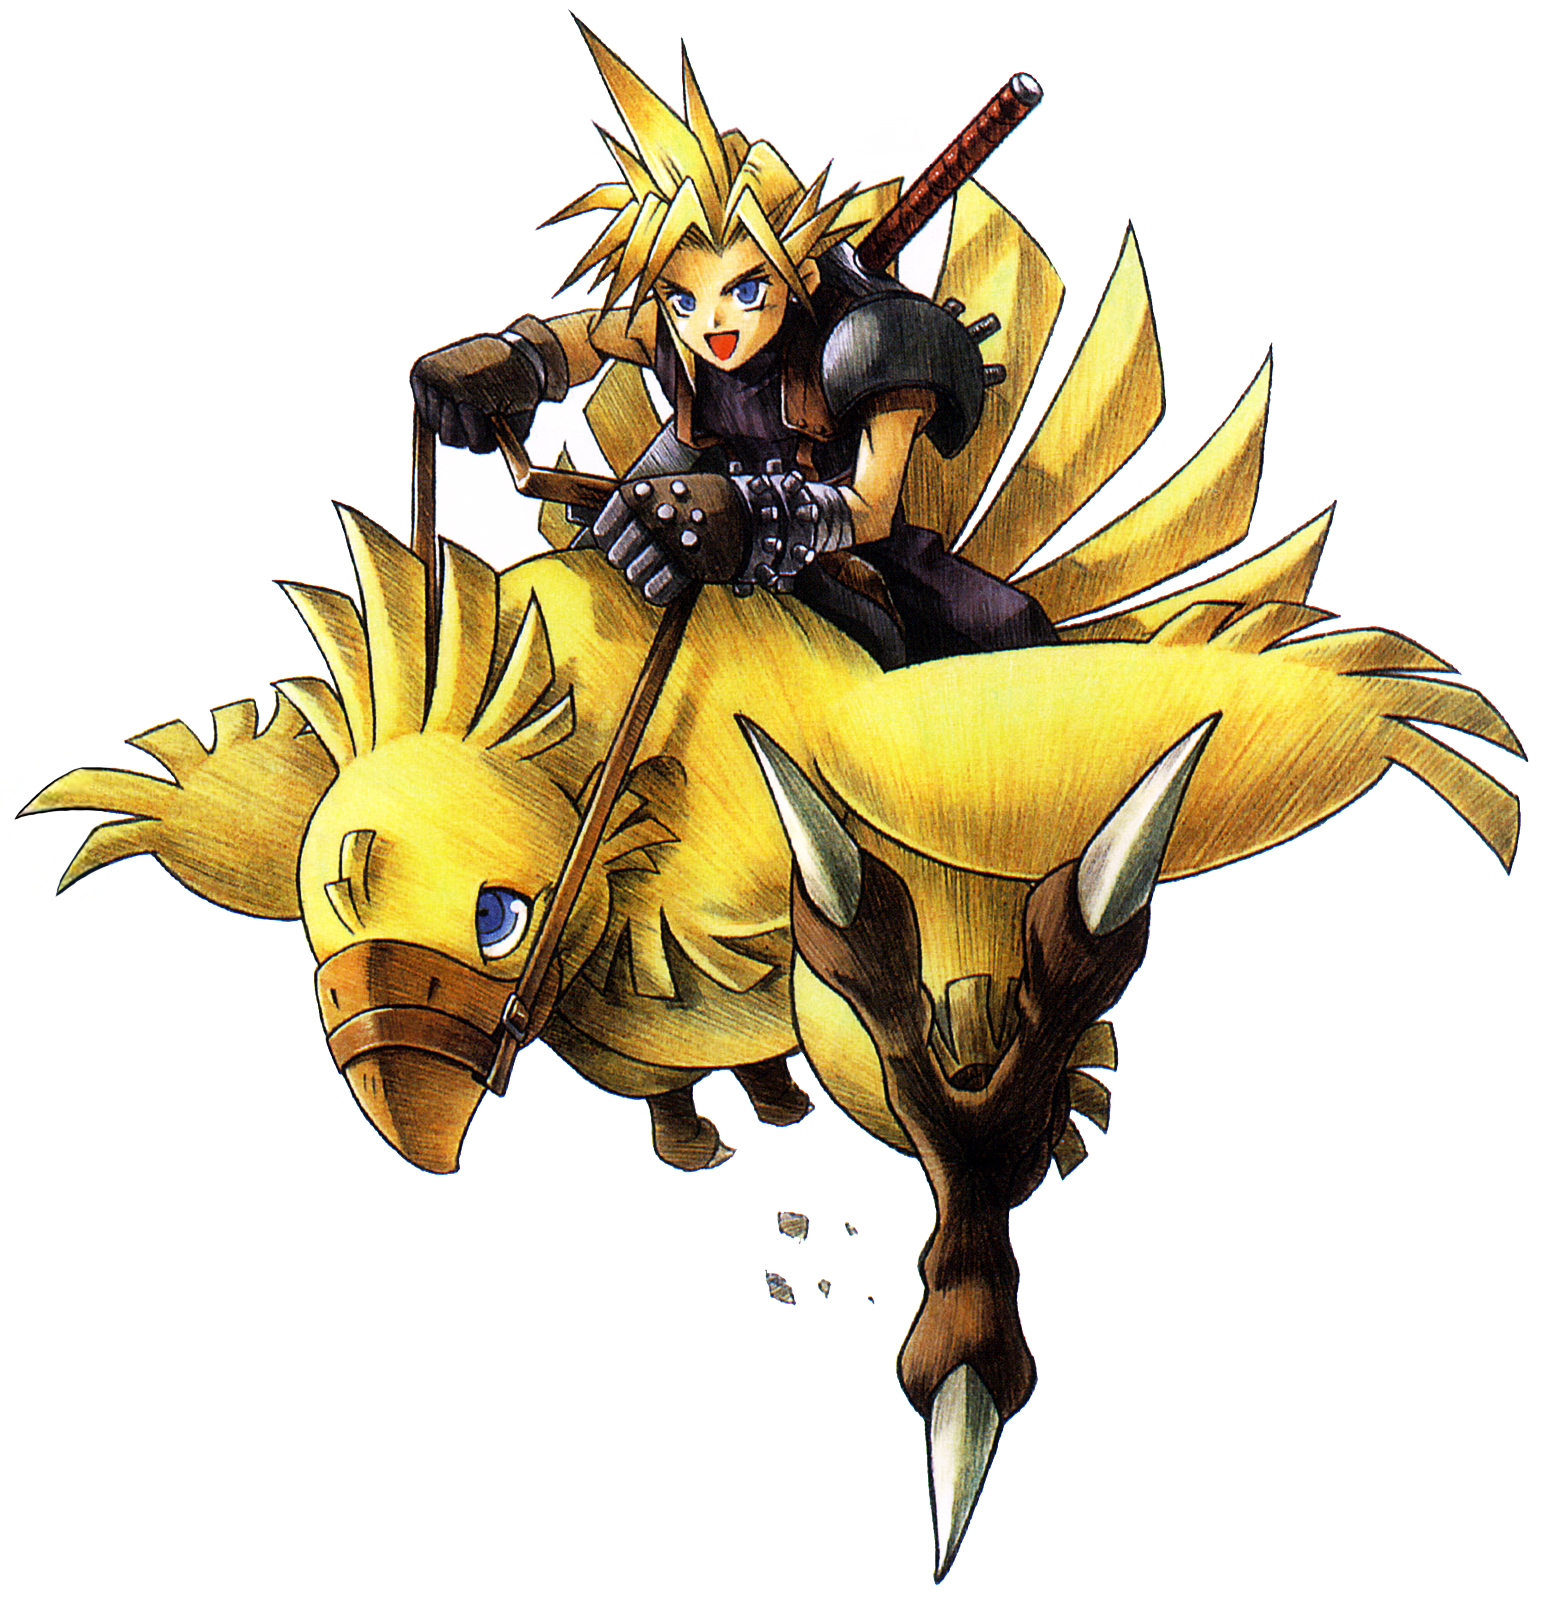 chocobo-final-fantasy-vii-the-final-fantasy-wiki-10-years-of